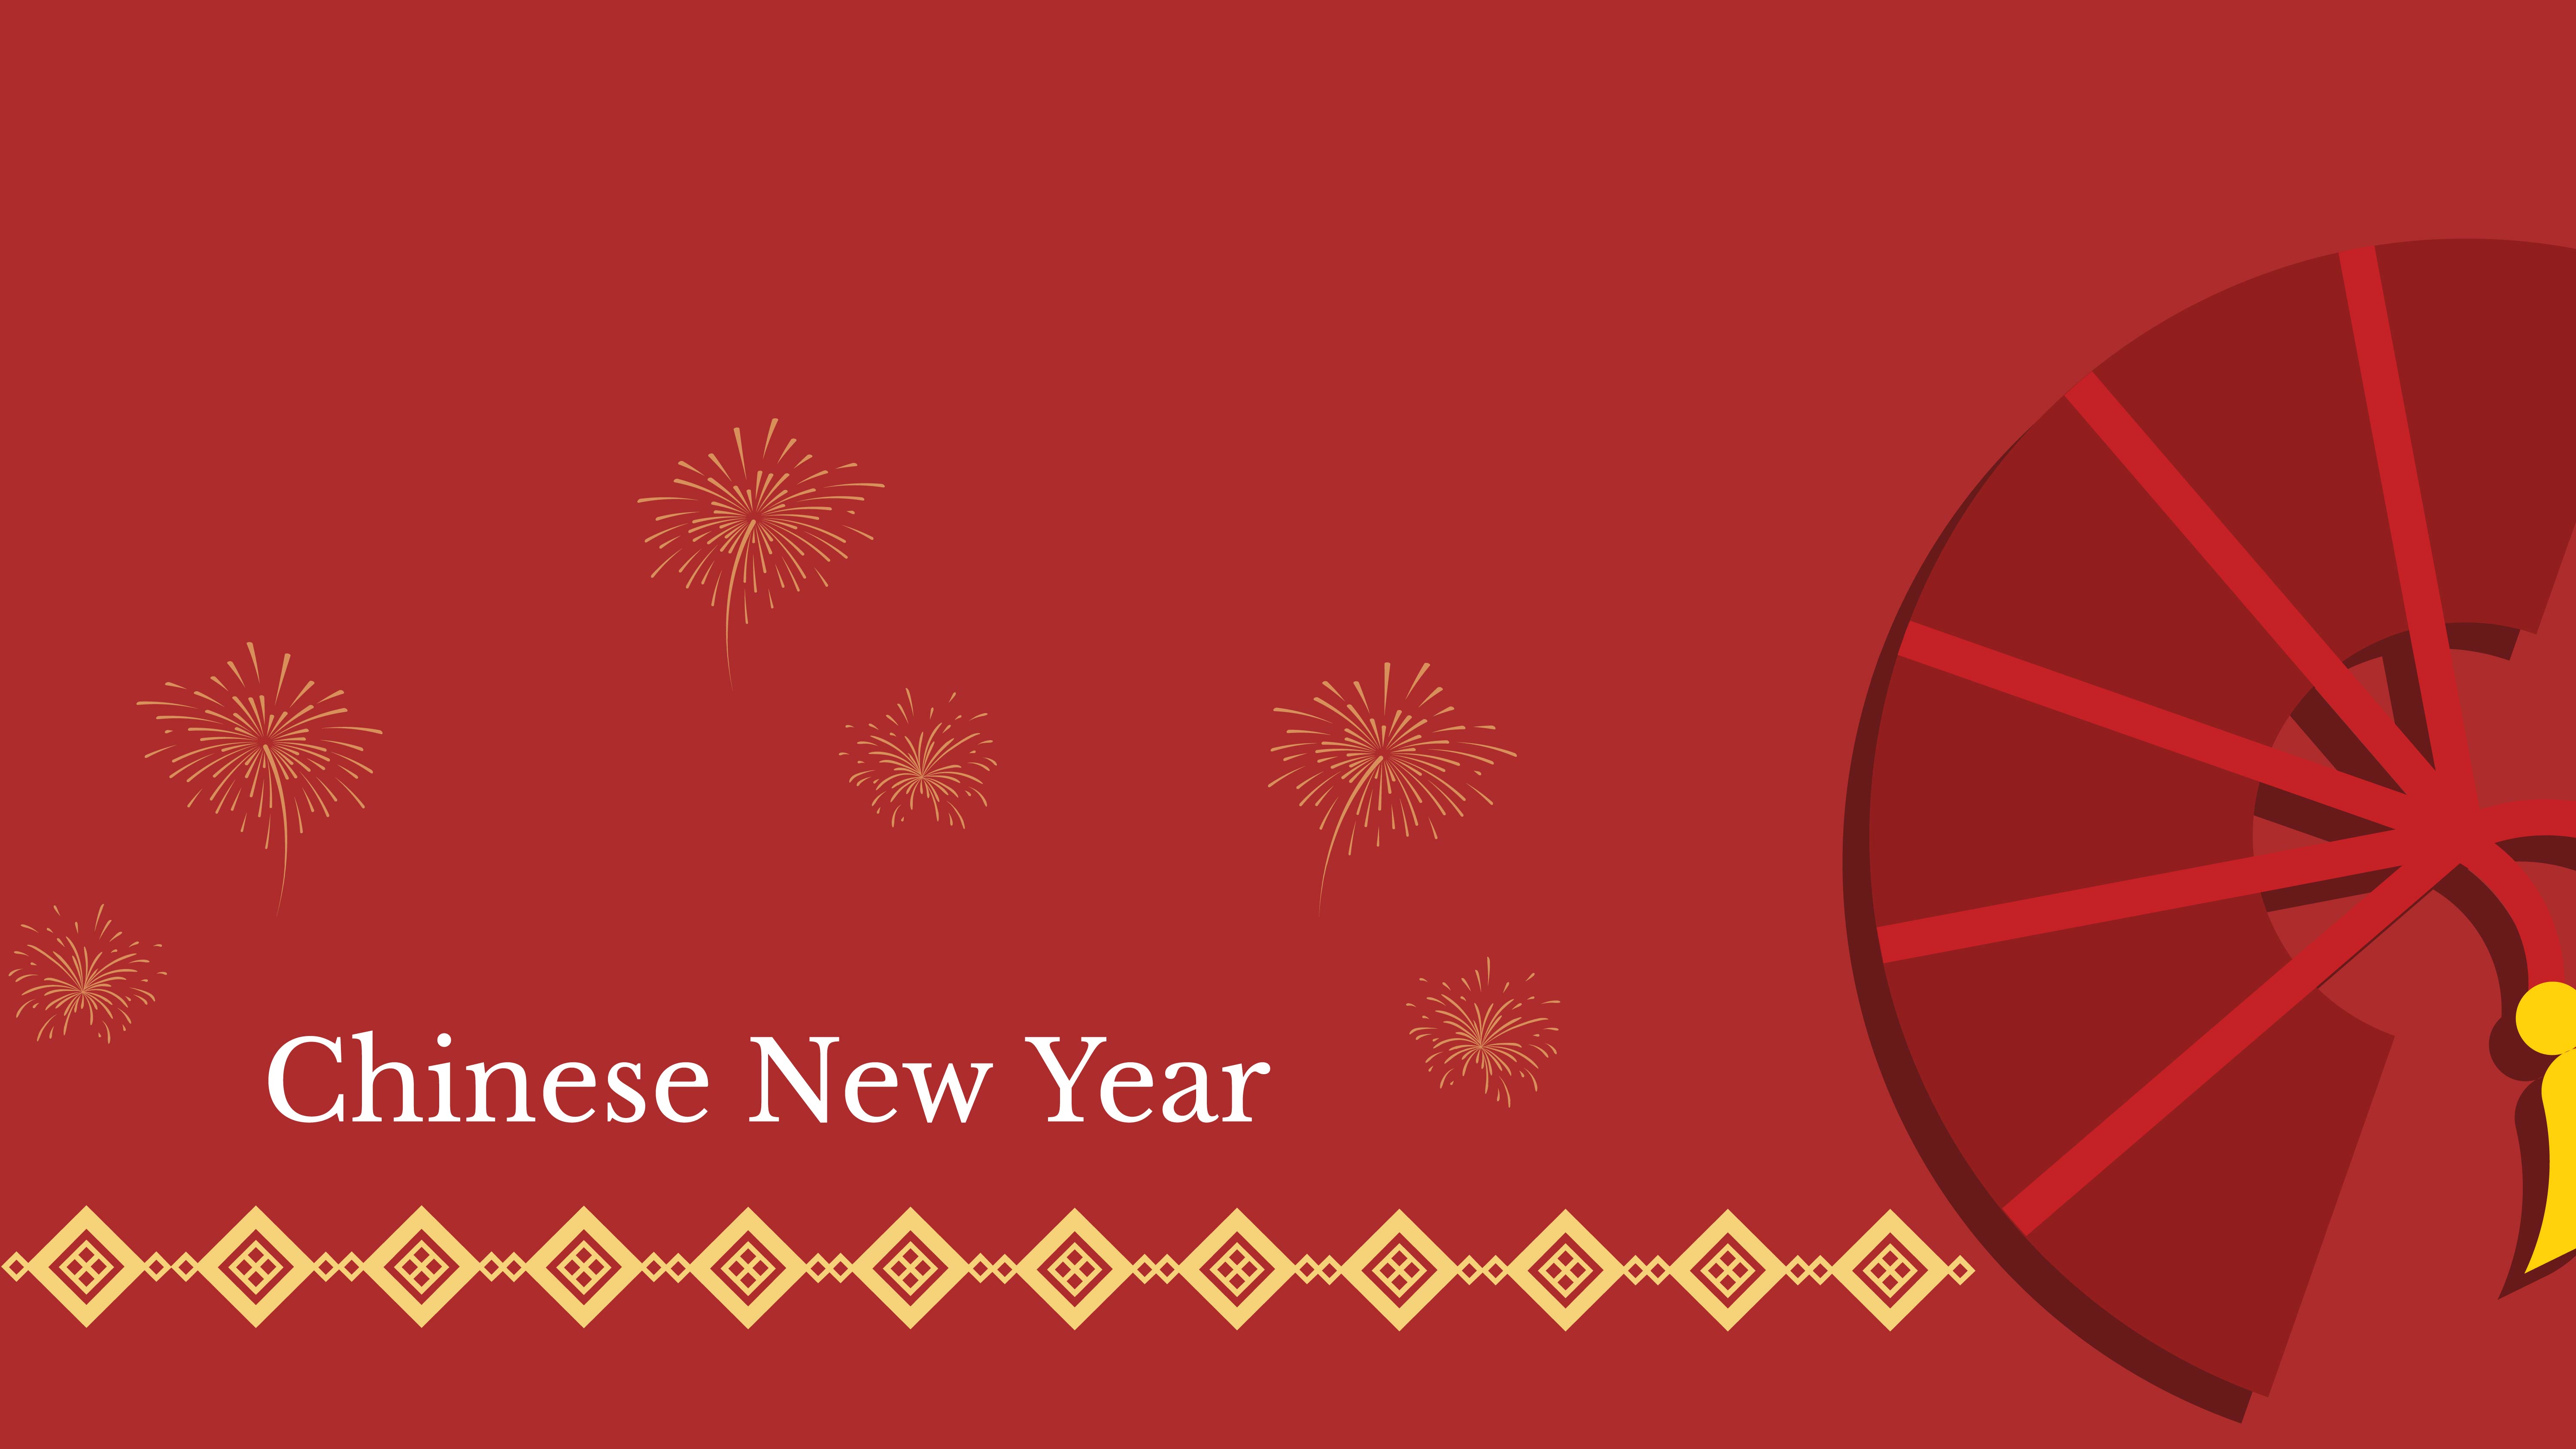 Free Free Chinese New Year Banner Background - Download in PDF,  Illustrator, PSD, EPS, SVG, JPG, PNG